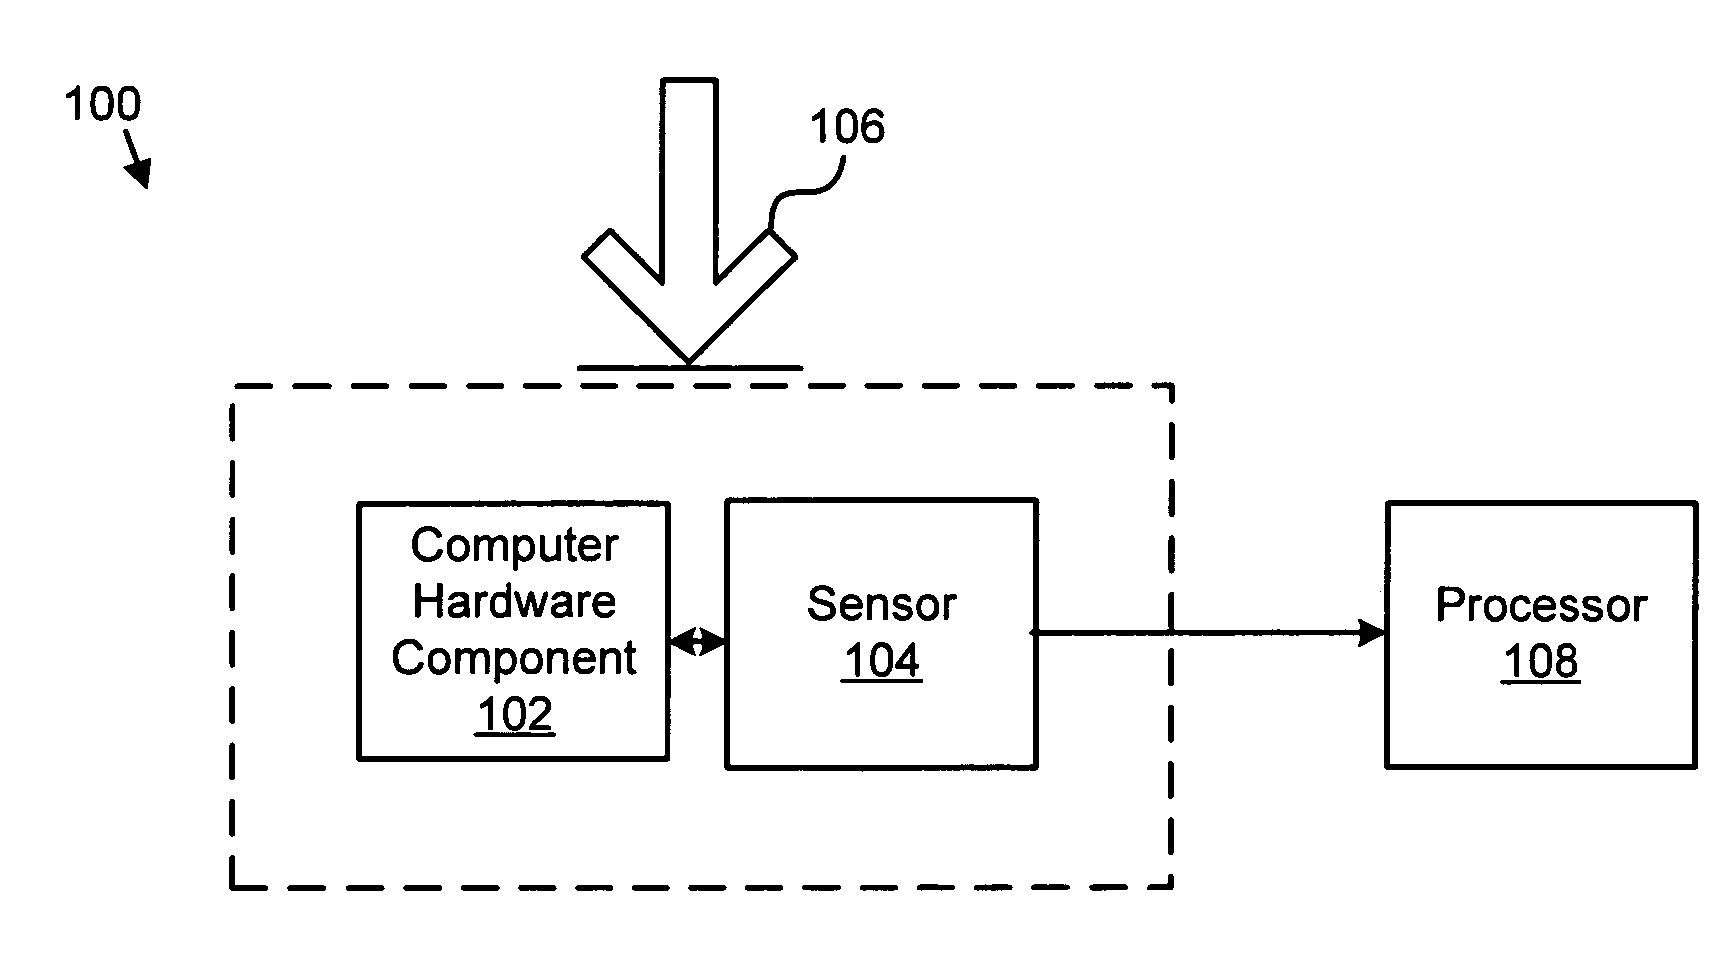 Apparatus, system, and method for identifying structural stress conditions for computer hardware